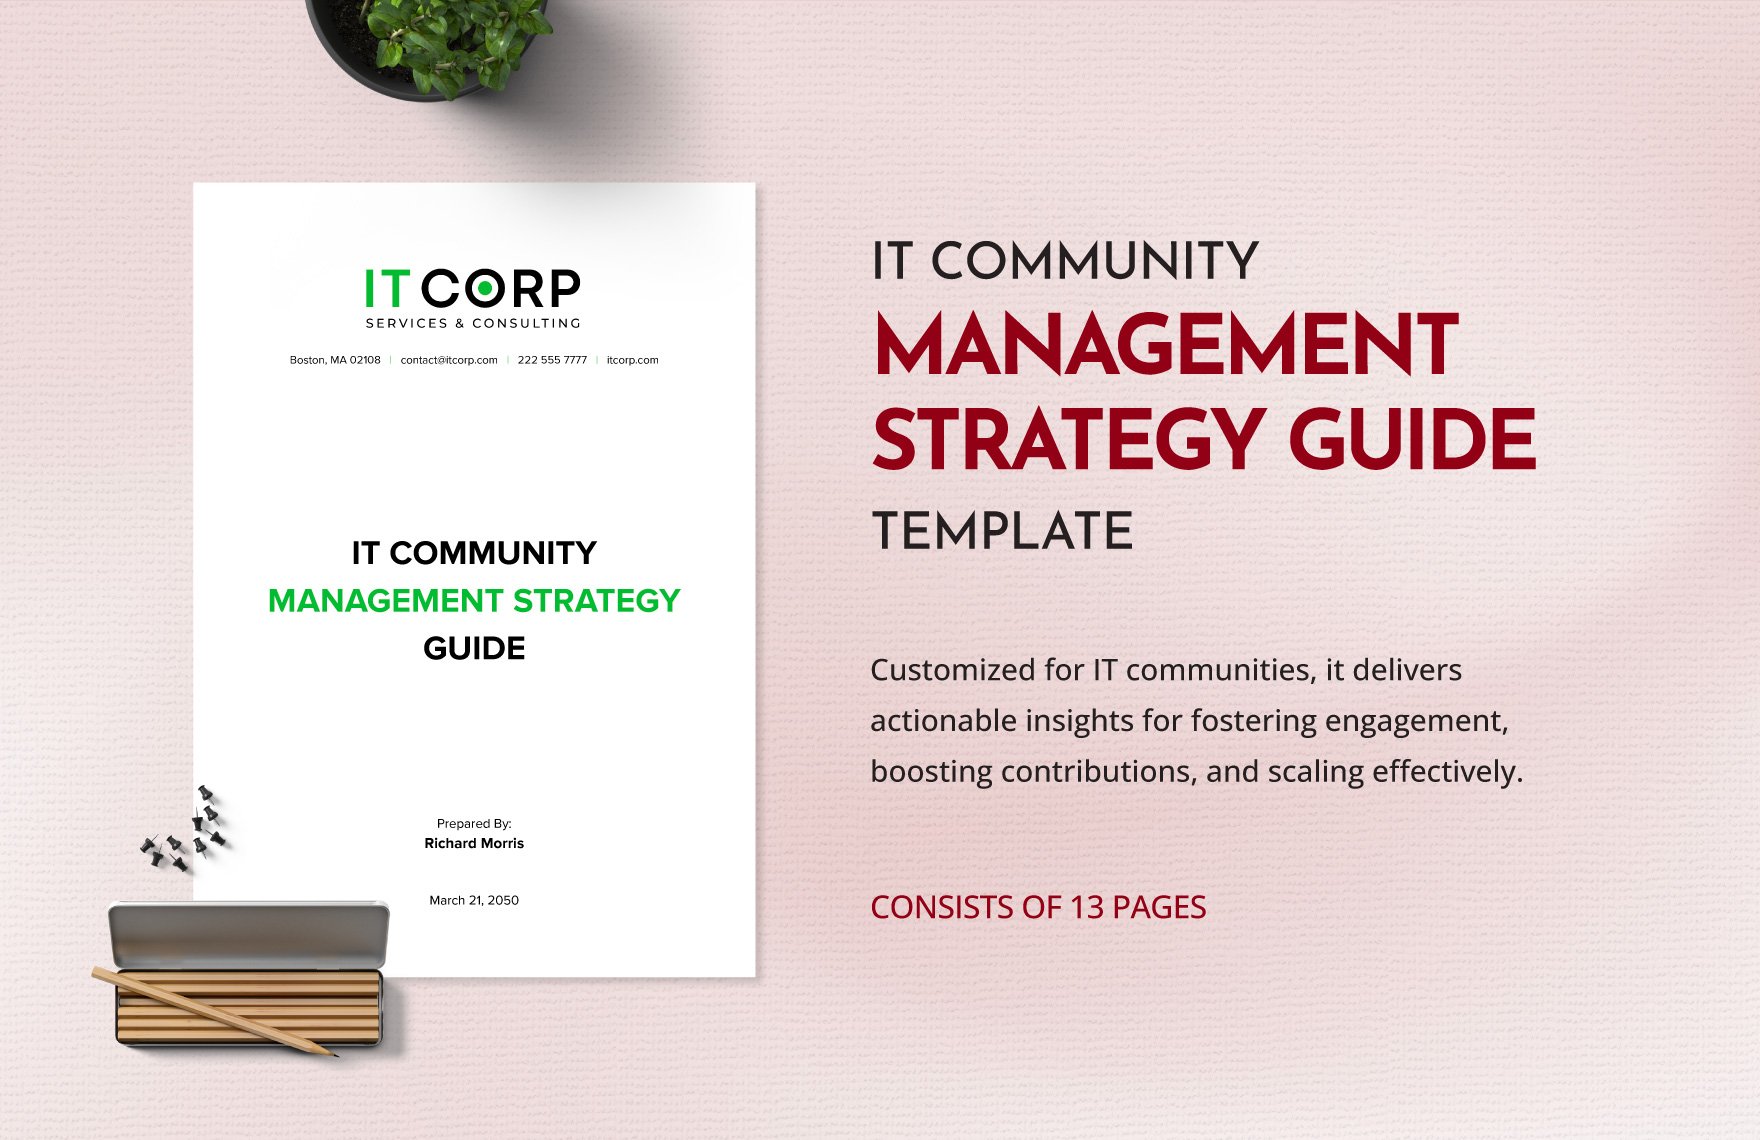 IT Community Management Strategy Guide Template